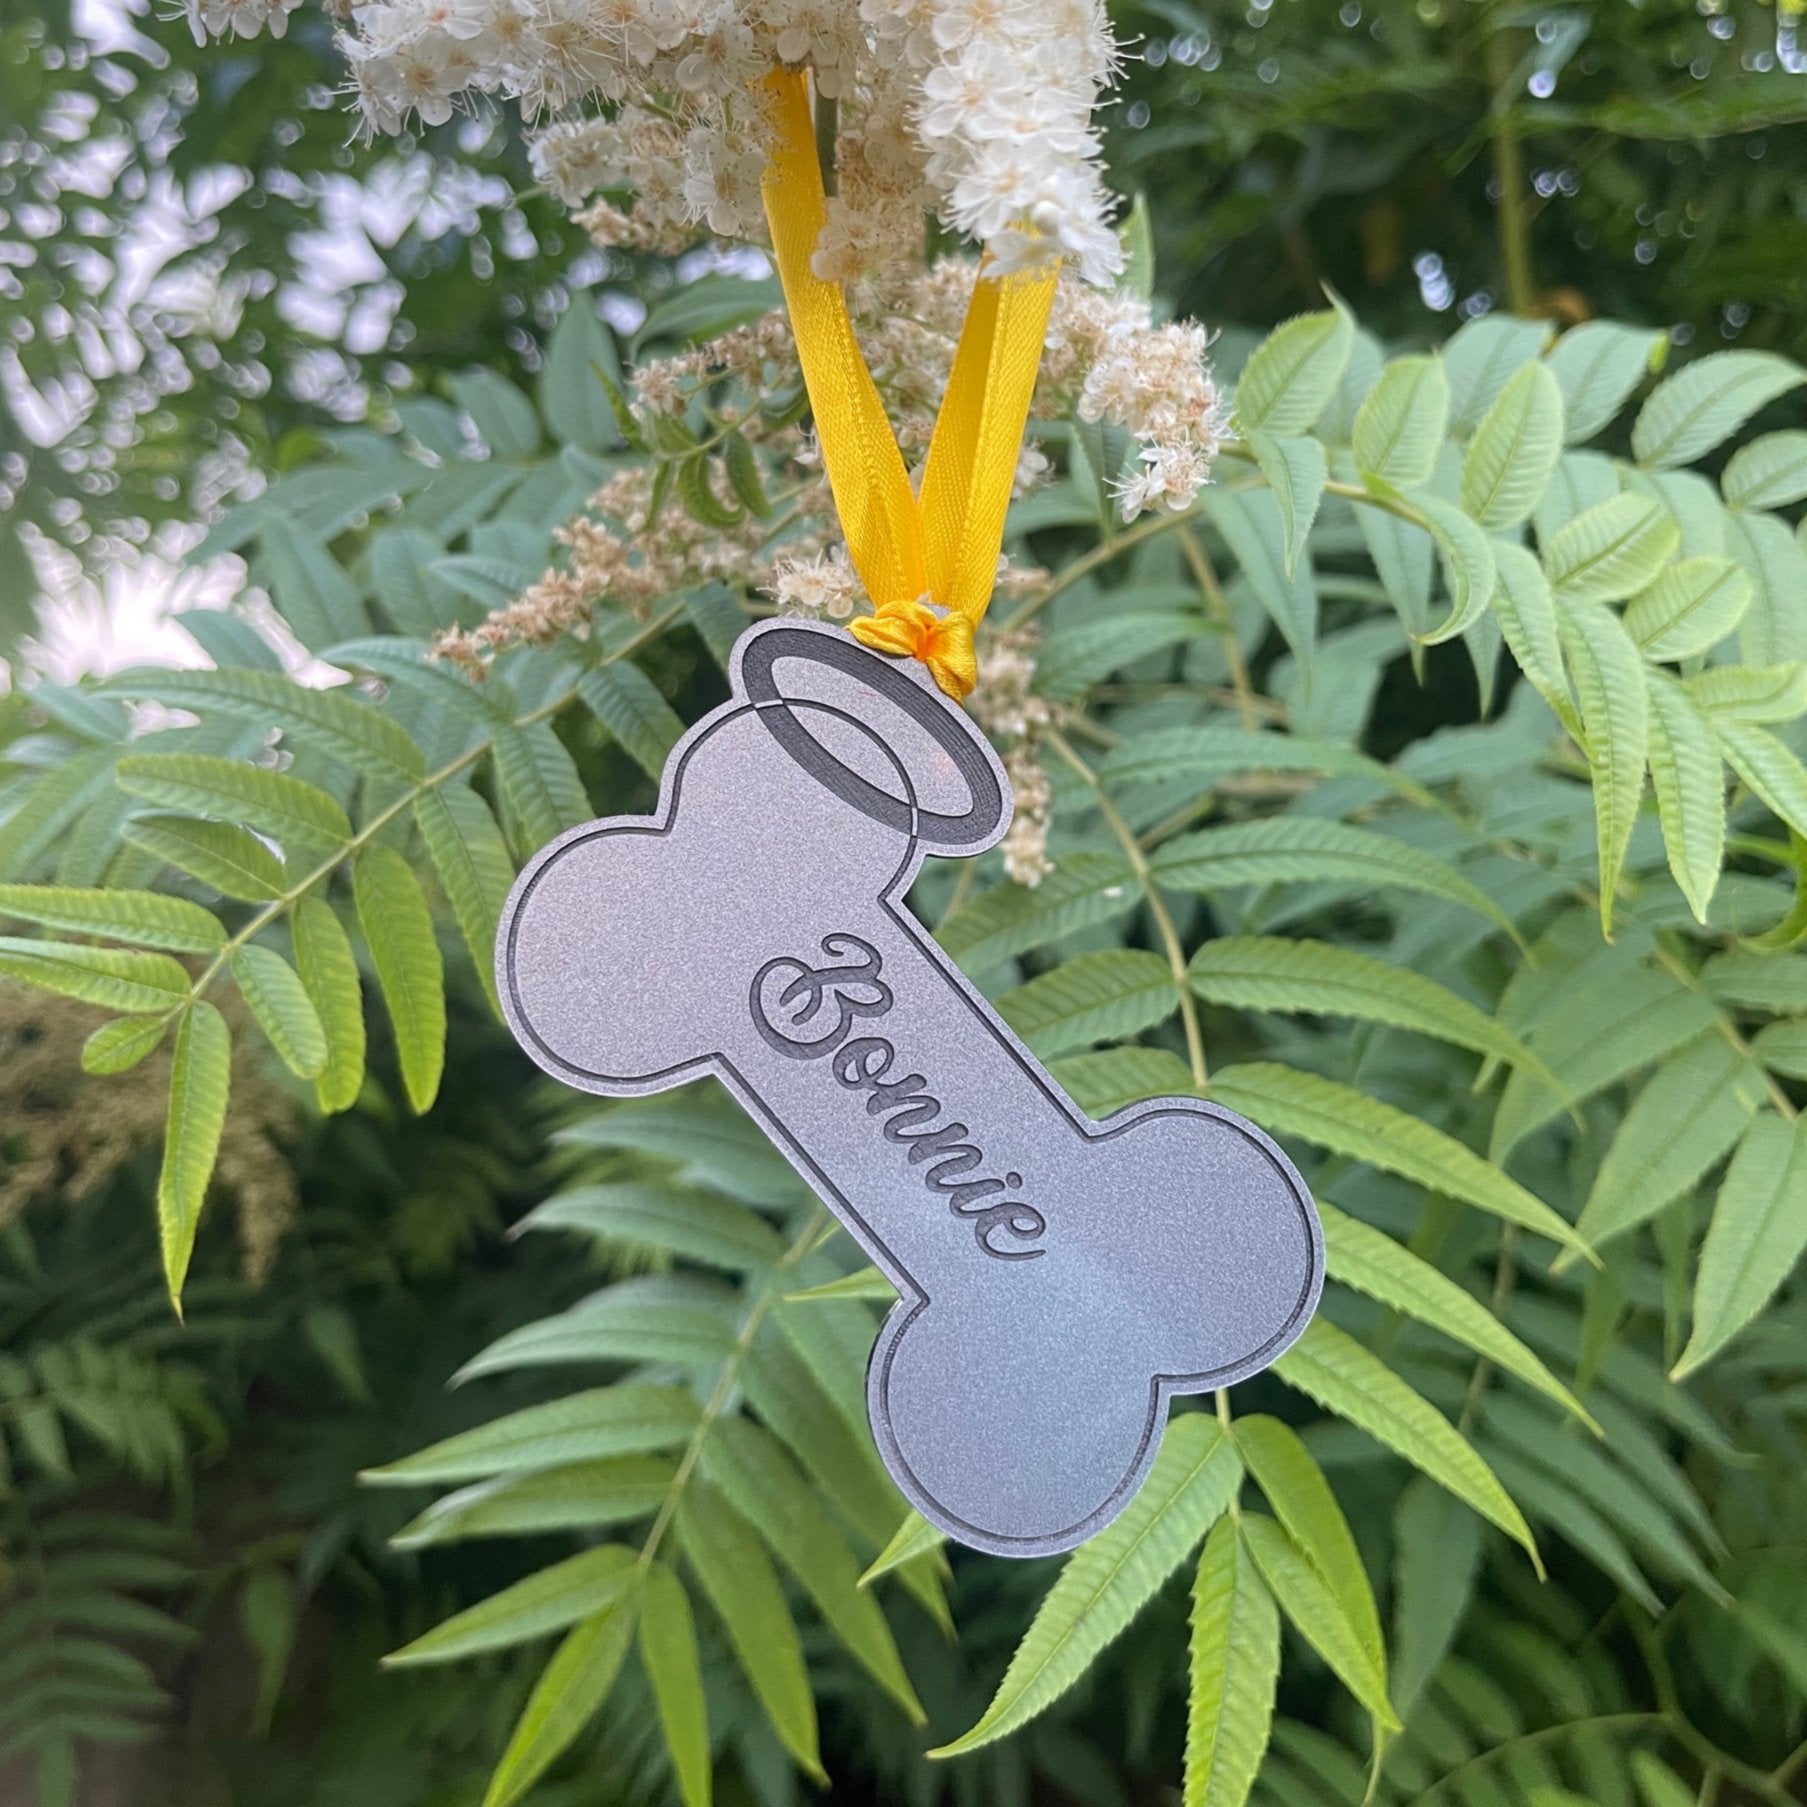 Personalized Dog Remembrance Hanging Bone with Halo: A yellow ribbon hangs from a heart-shaped hole at the top of a 3mm thick acrylic bone. The bone is engraved with a black name and surrounded by a halo. This memorial keepsake is a heartfelt way to remember a cherished dog, personalized and enduring.